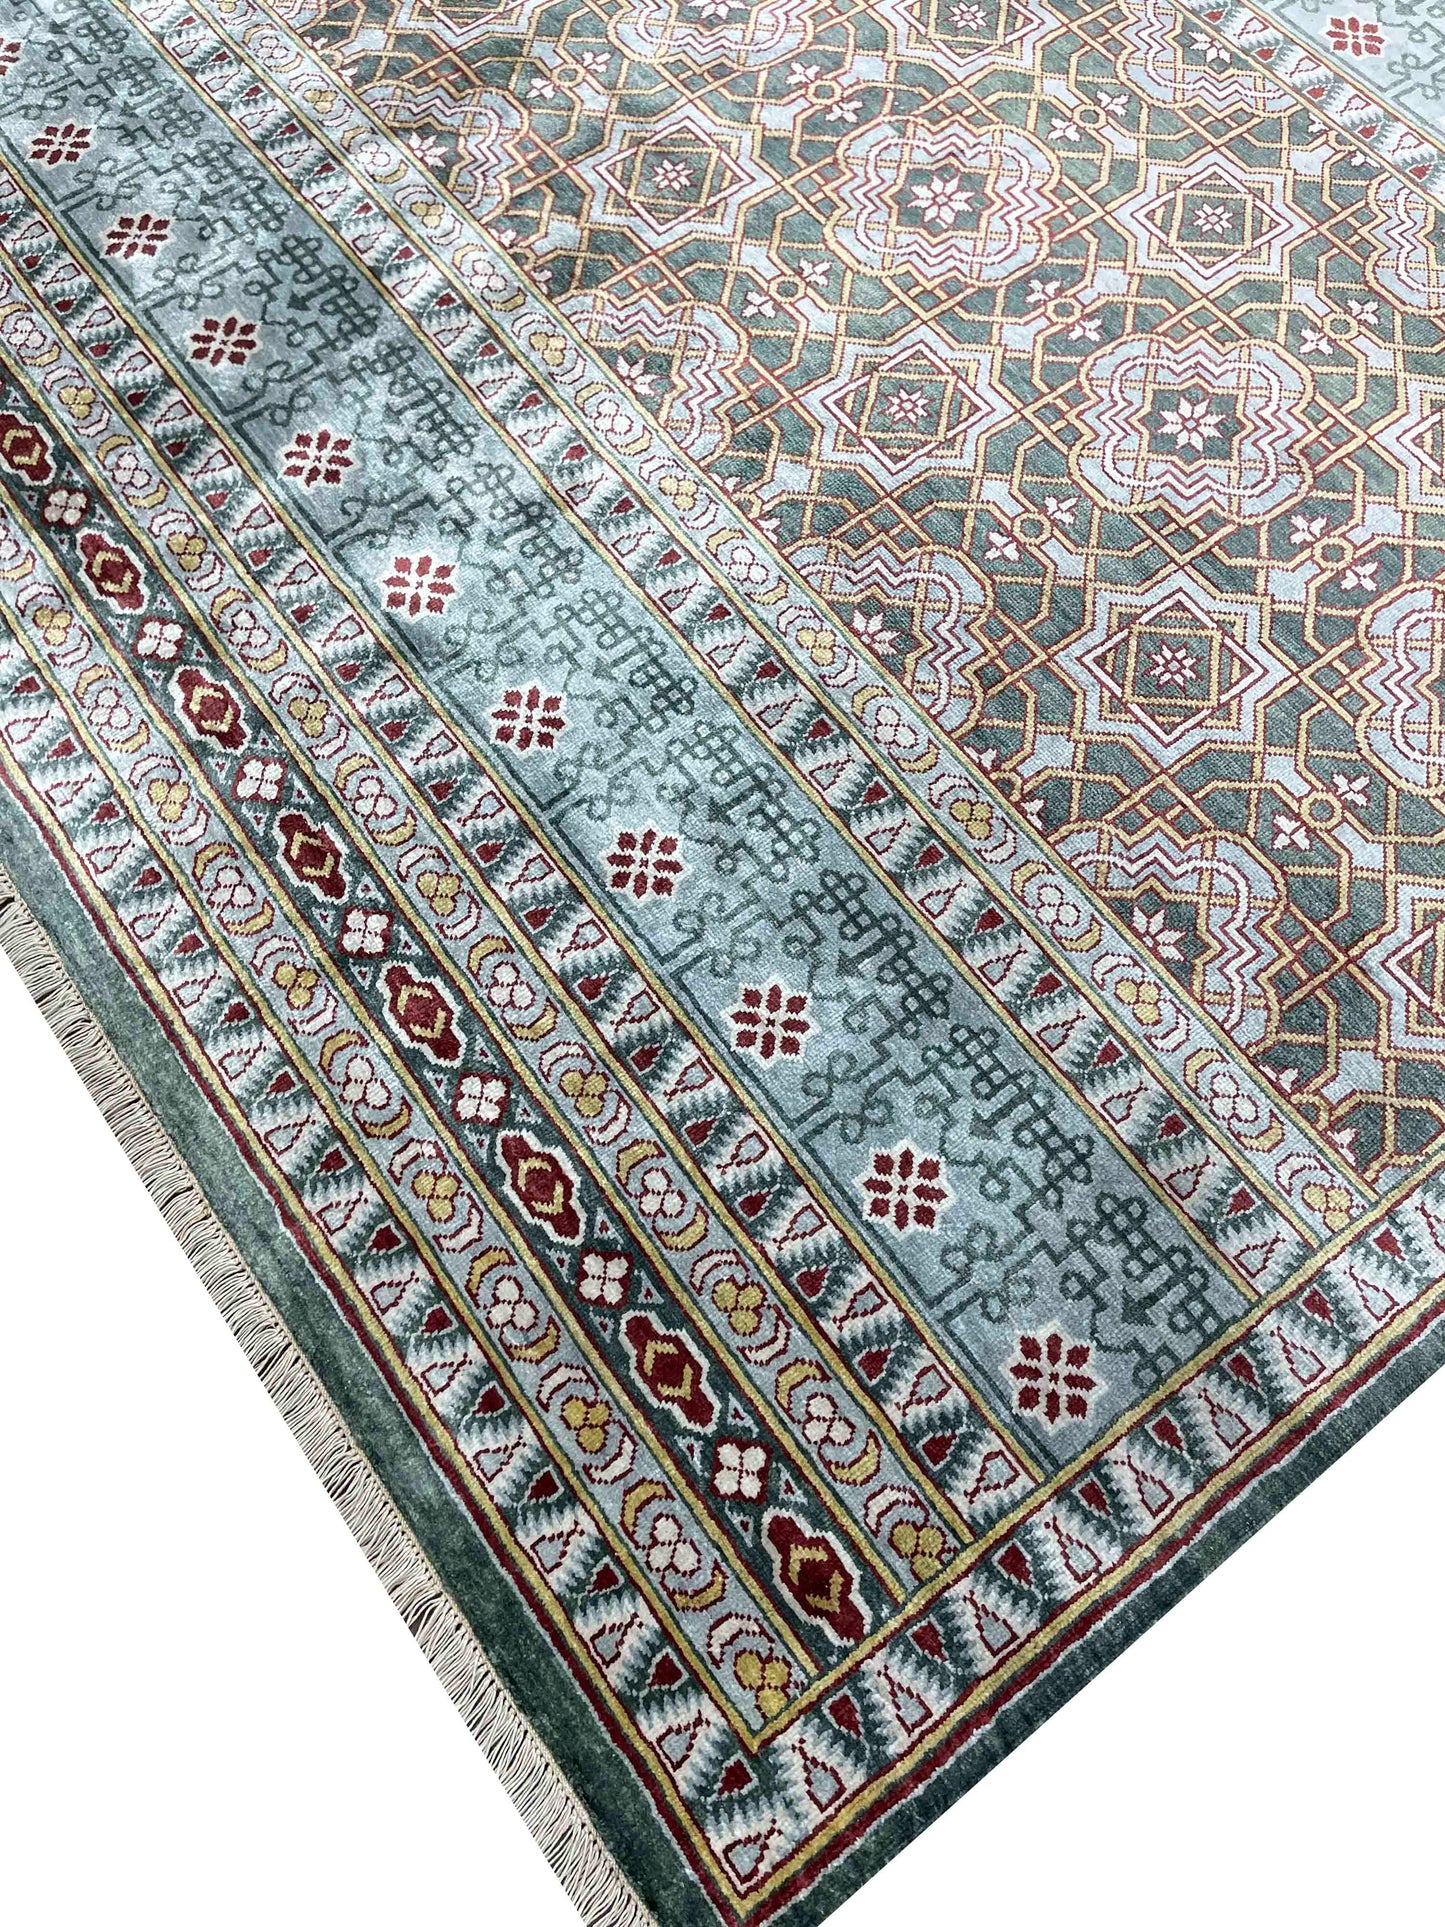 Get trendy with Blue and Multi Pure Silk Geometrical Handknotted Area Rug 7.10x9.11ft 238x302Cms - Traditional Rugs available at Jaipur Oriental Rugs. Grab yours for $5595.00 today!